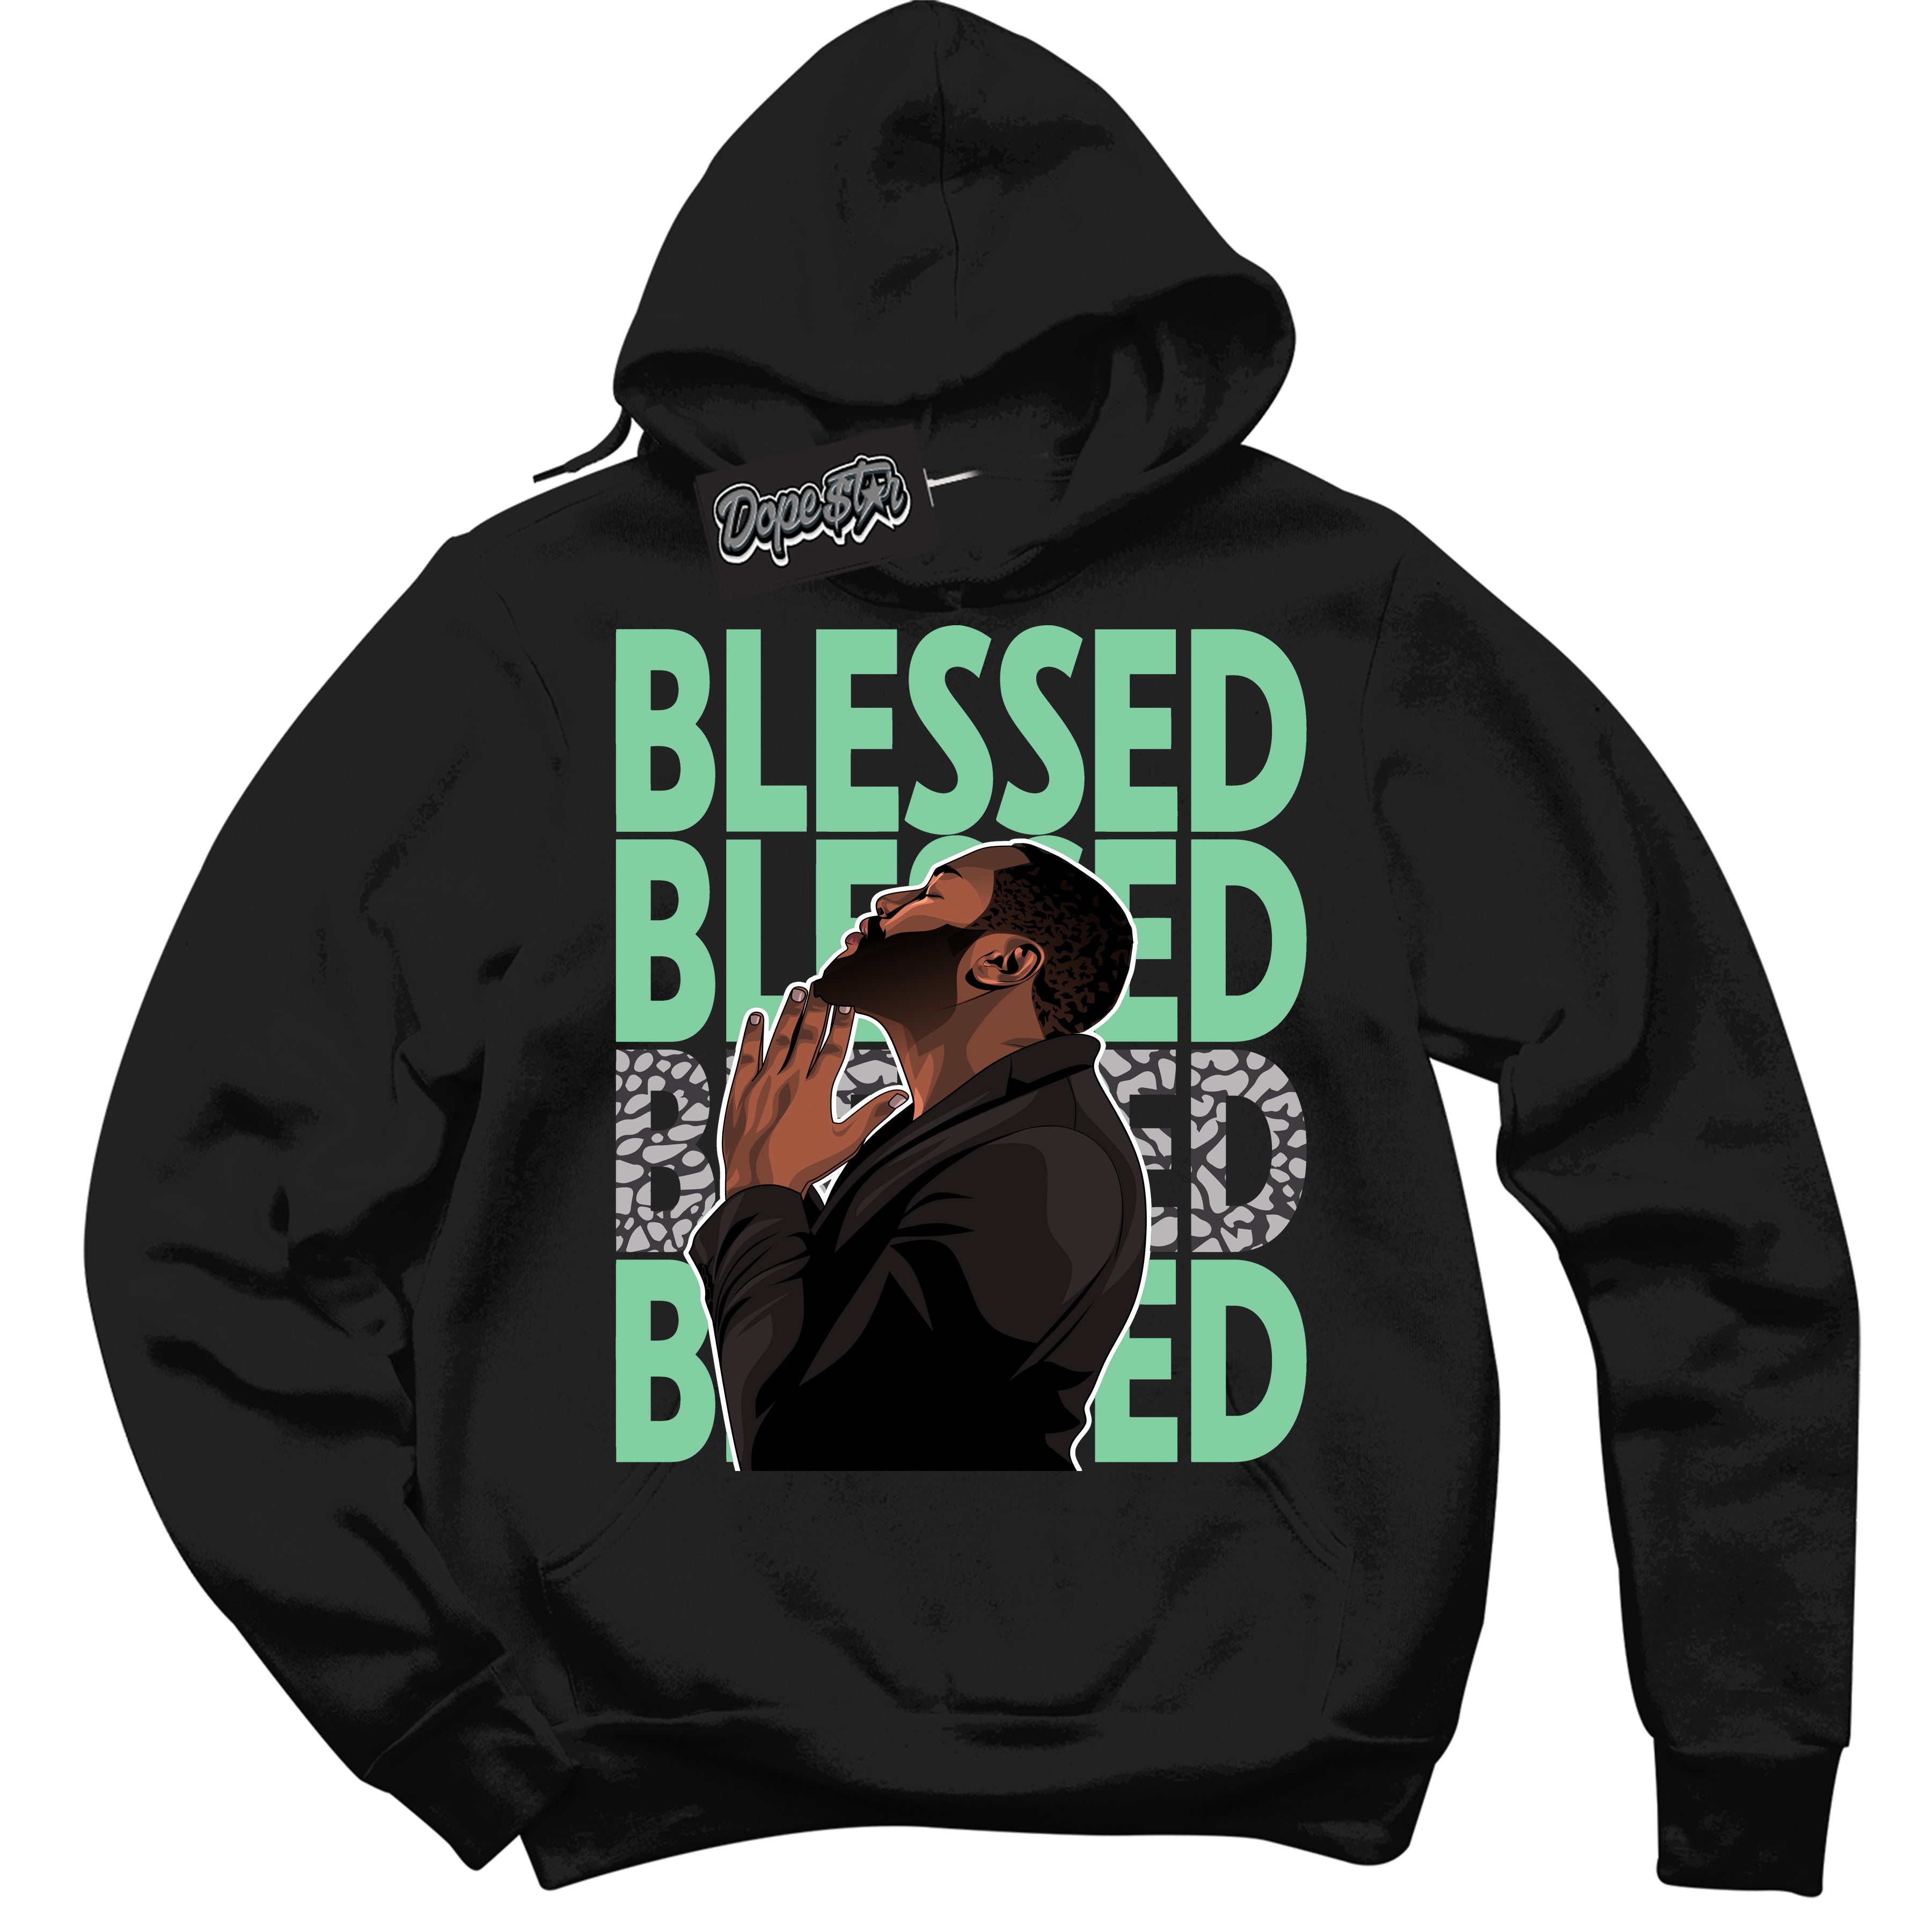 Cool Black Graphic DopeStar Hoodie with “ God Blessed “ print, that perfectly matches Green Glow 3S sneakers